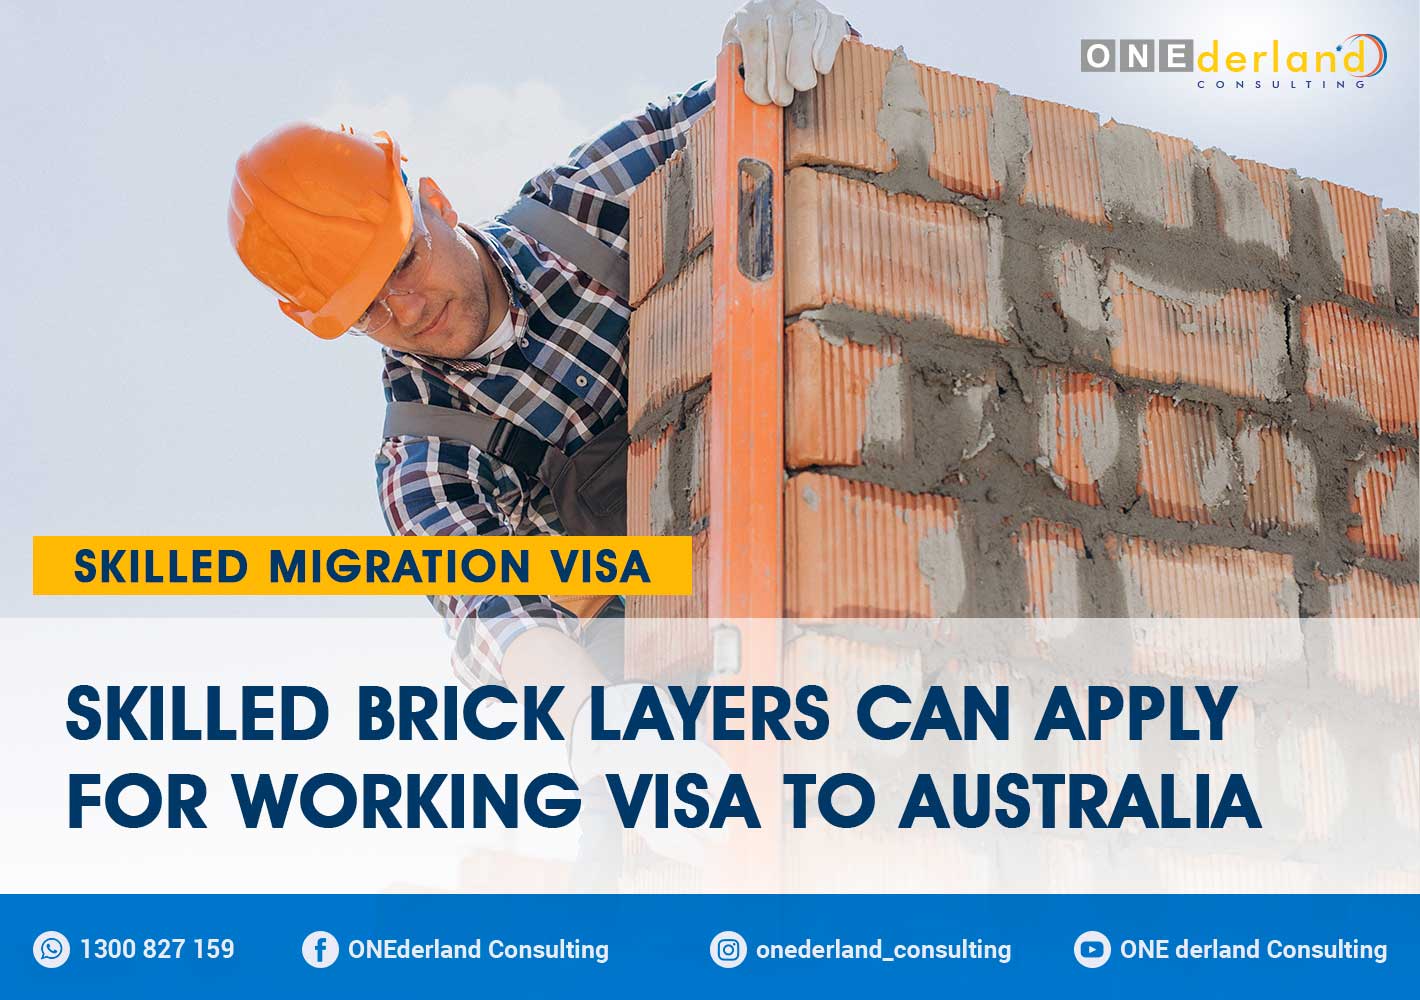 Skilled Brick Layers Can Apply for Working Visa to Australia